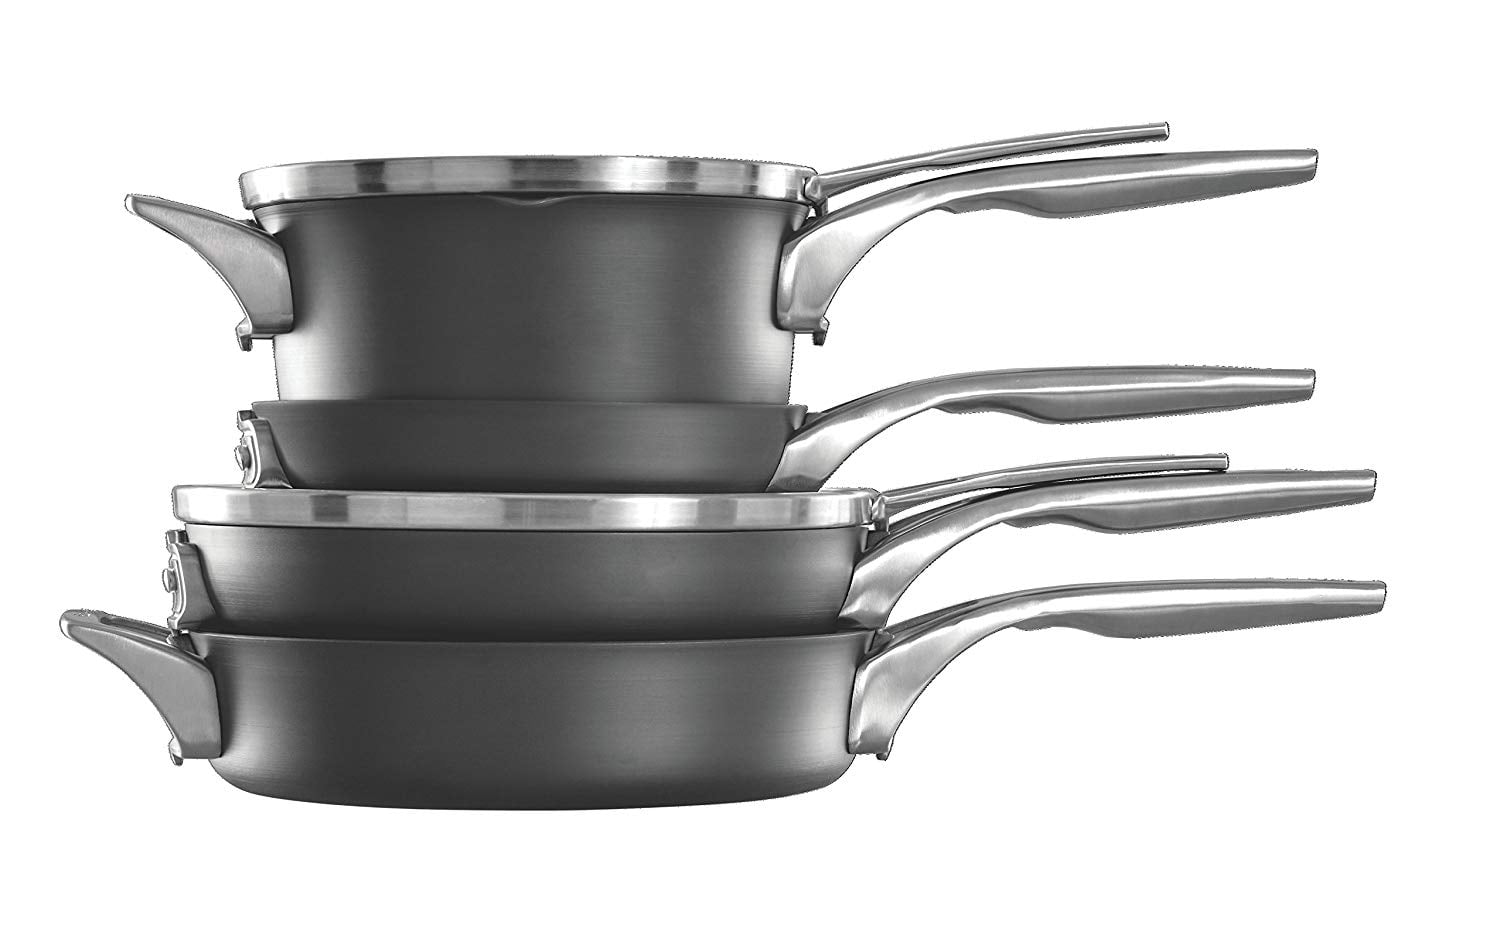 Calphalon Premier Nonstick With Mineralshield 10pc Space-saving Cookware Set  : Target